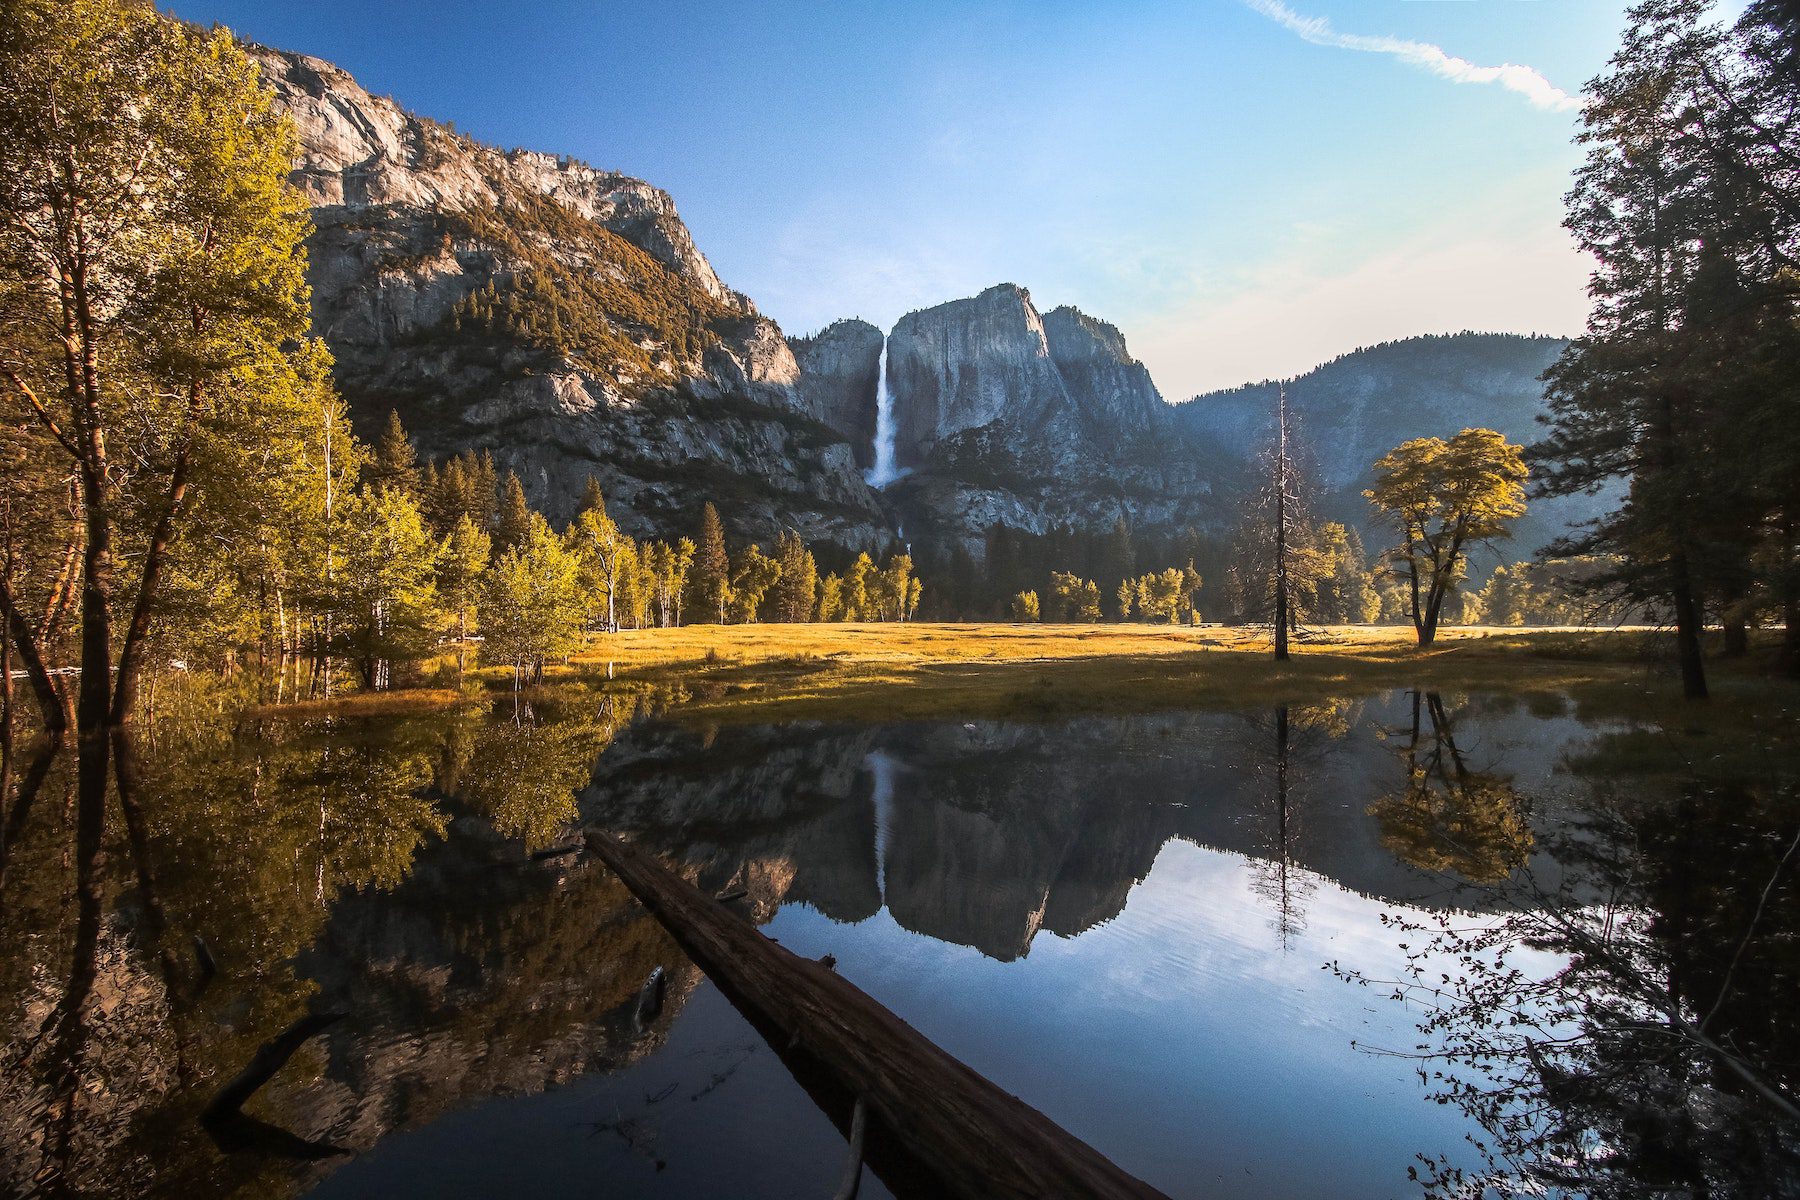 Yosemite Valley in Yosemite National, one of the most visited parks in the United States depicting a still lake reflecting the background of large cliffs and a waterfall.